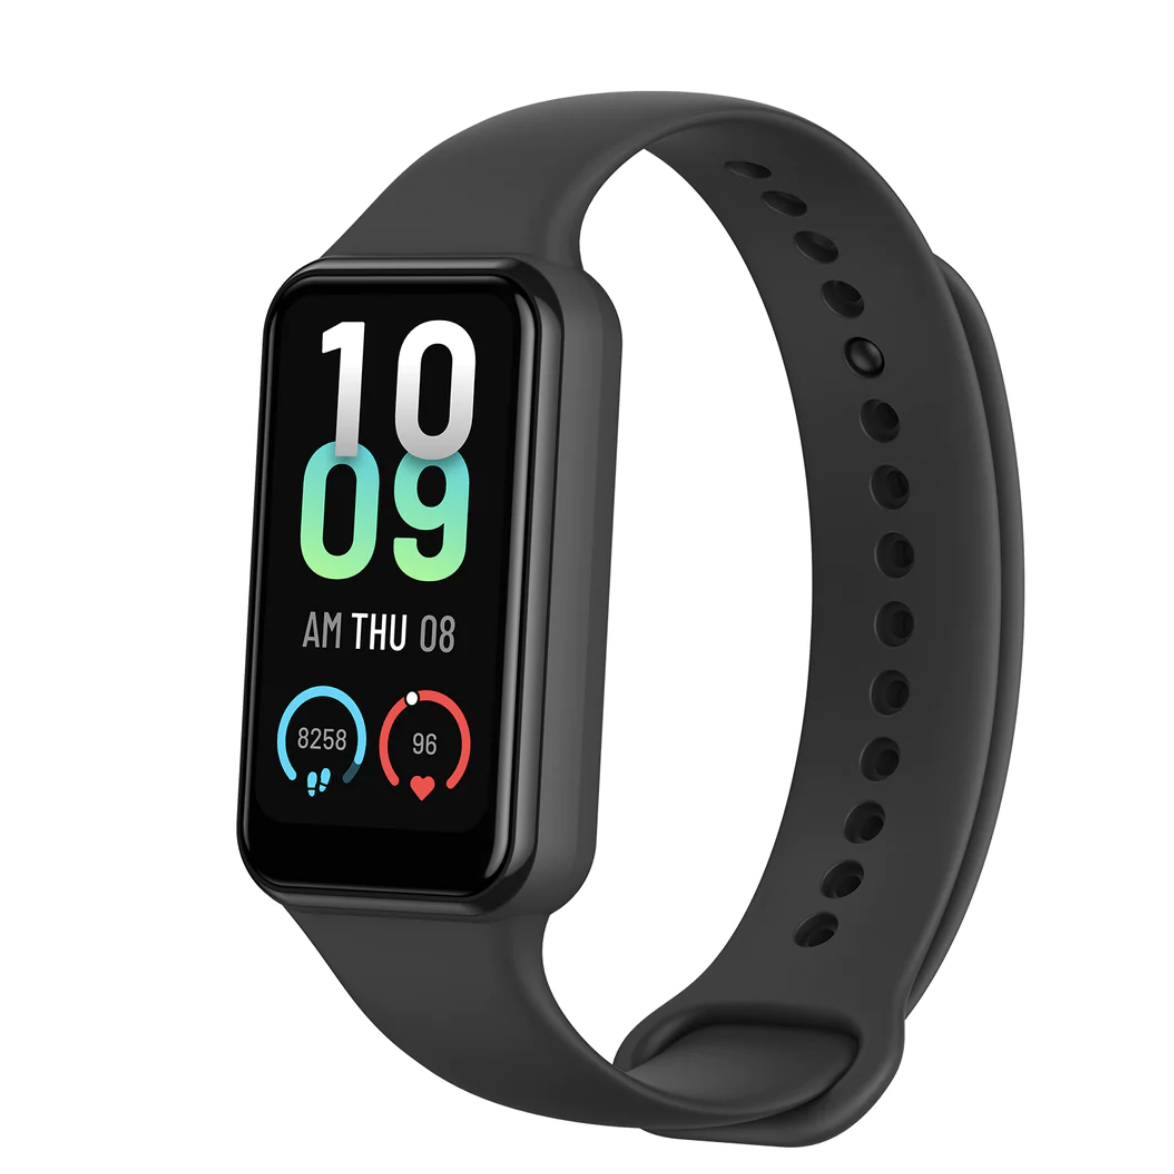 An image of a black Amazfit Band 7